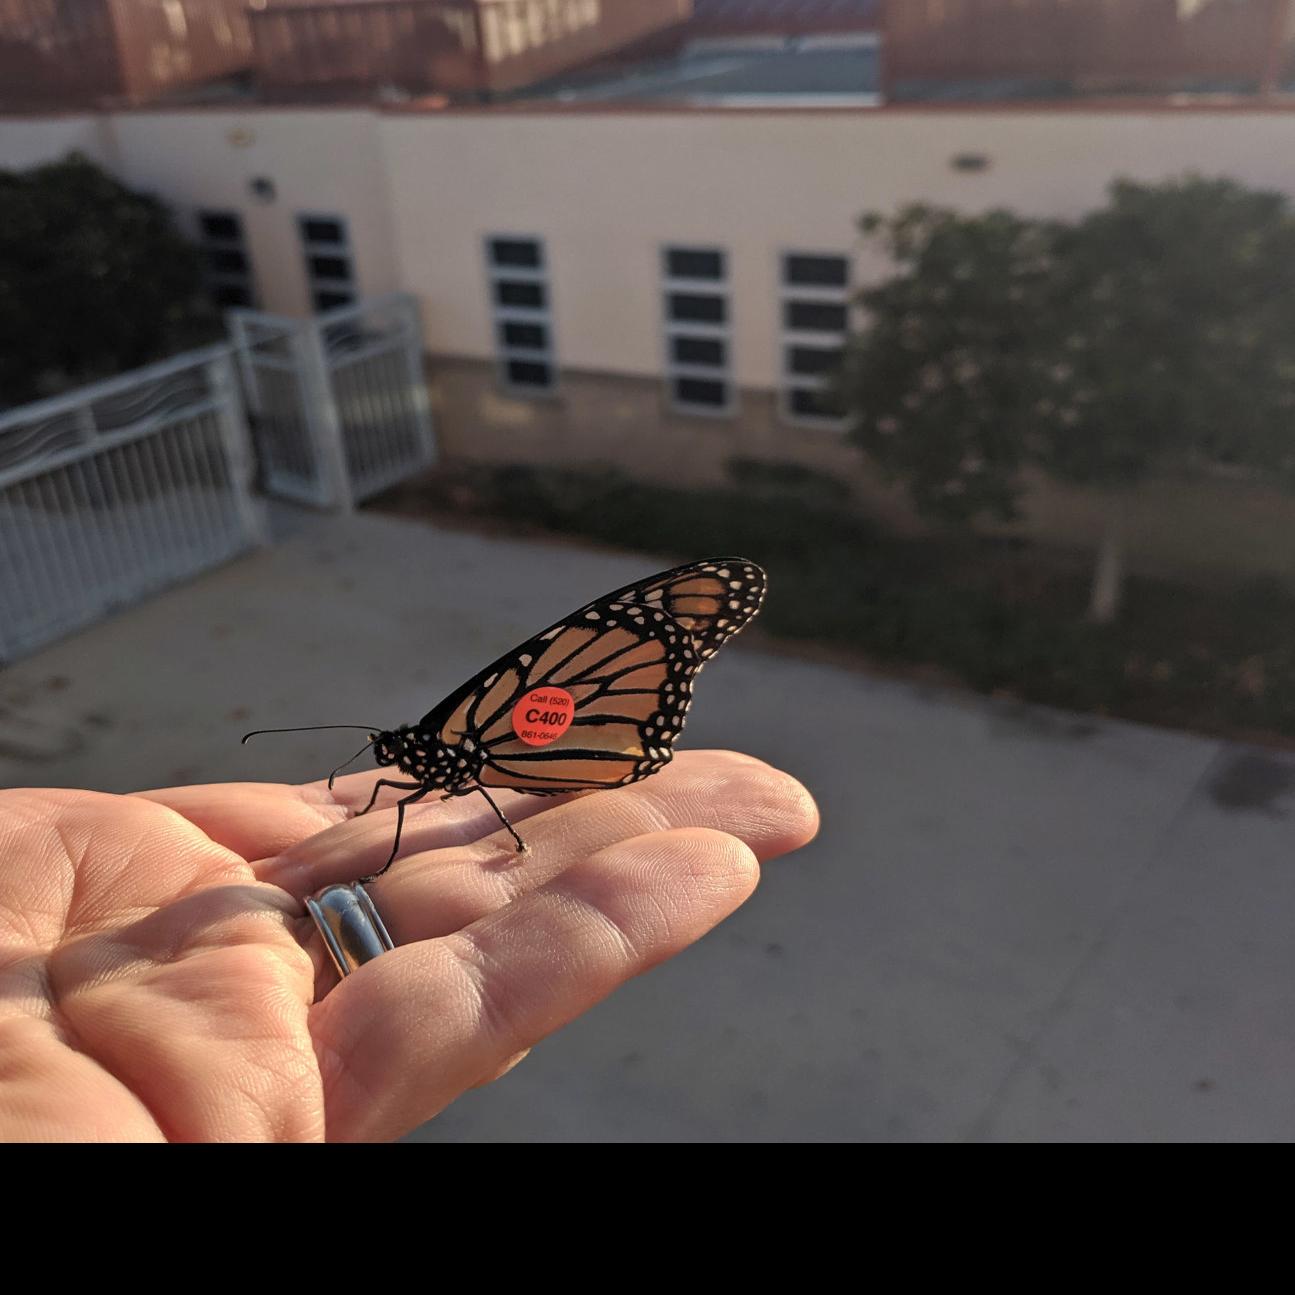 Arizona Butterfly Lands In California Classroom With Phone Number